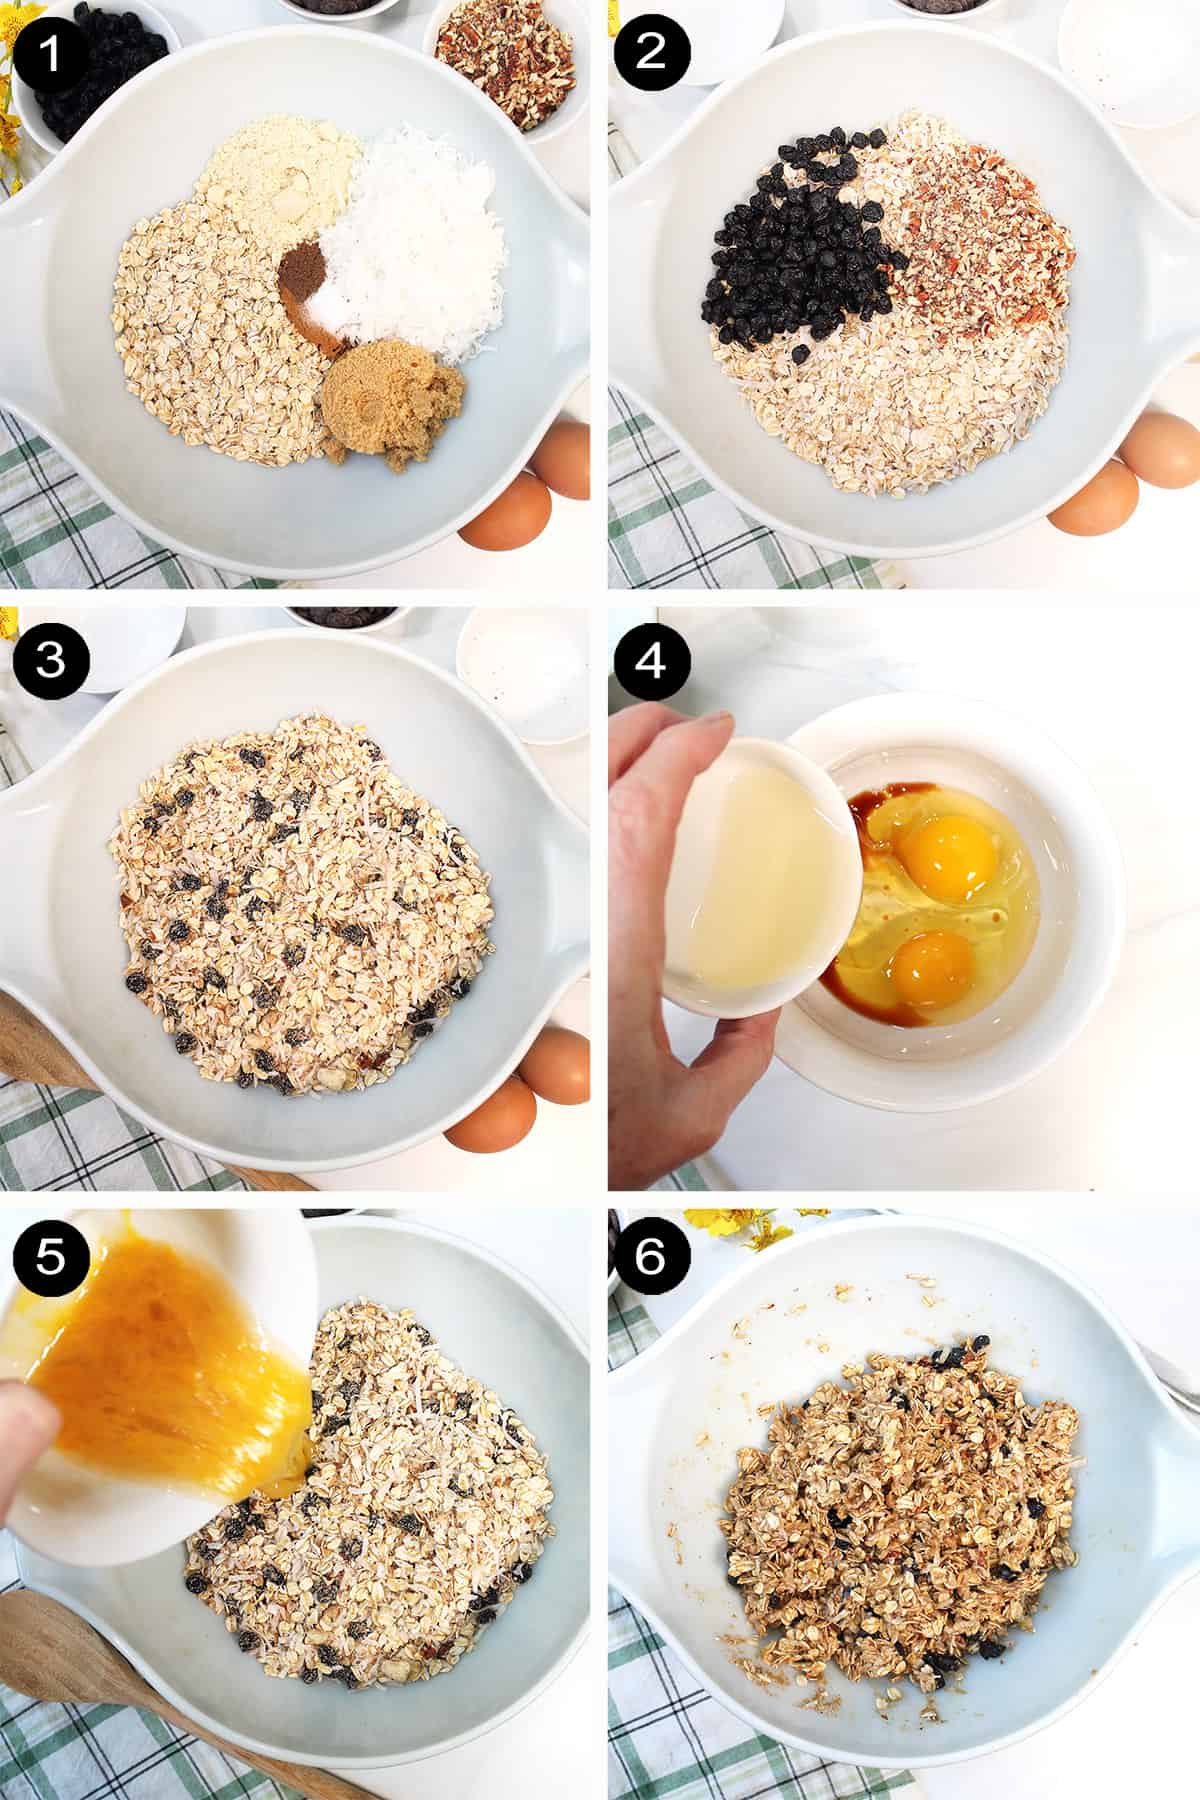 Collage of steps to make blueberry breakfast cookies.